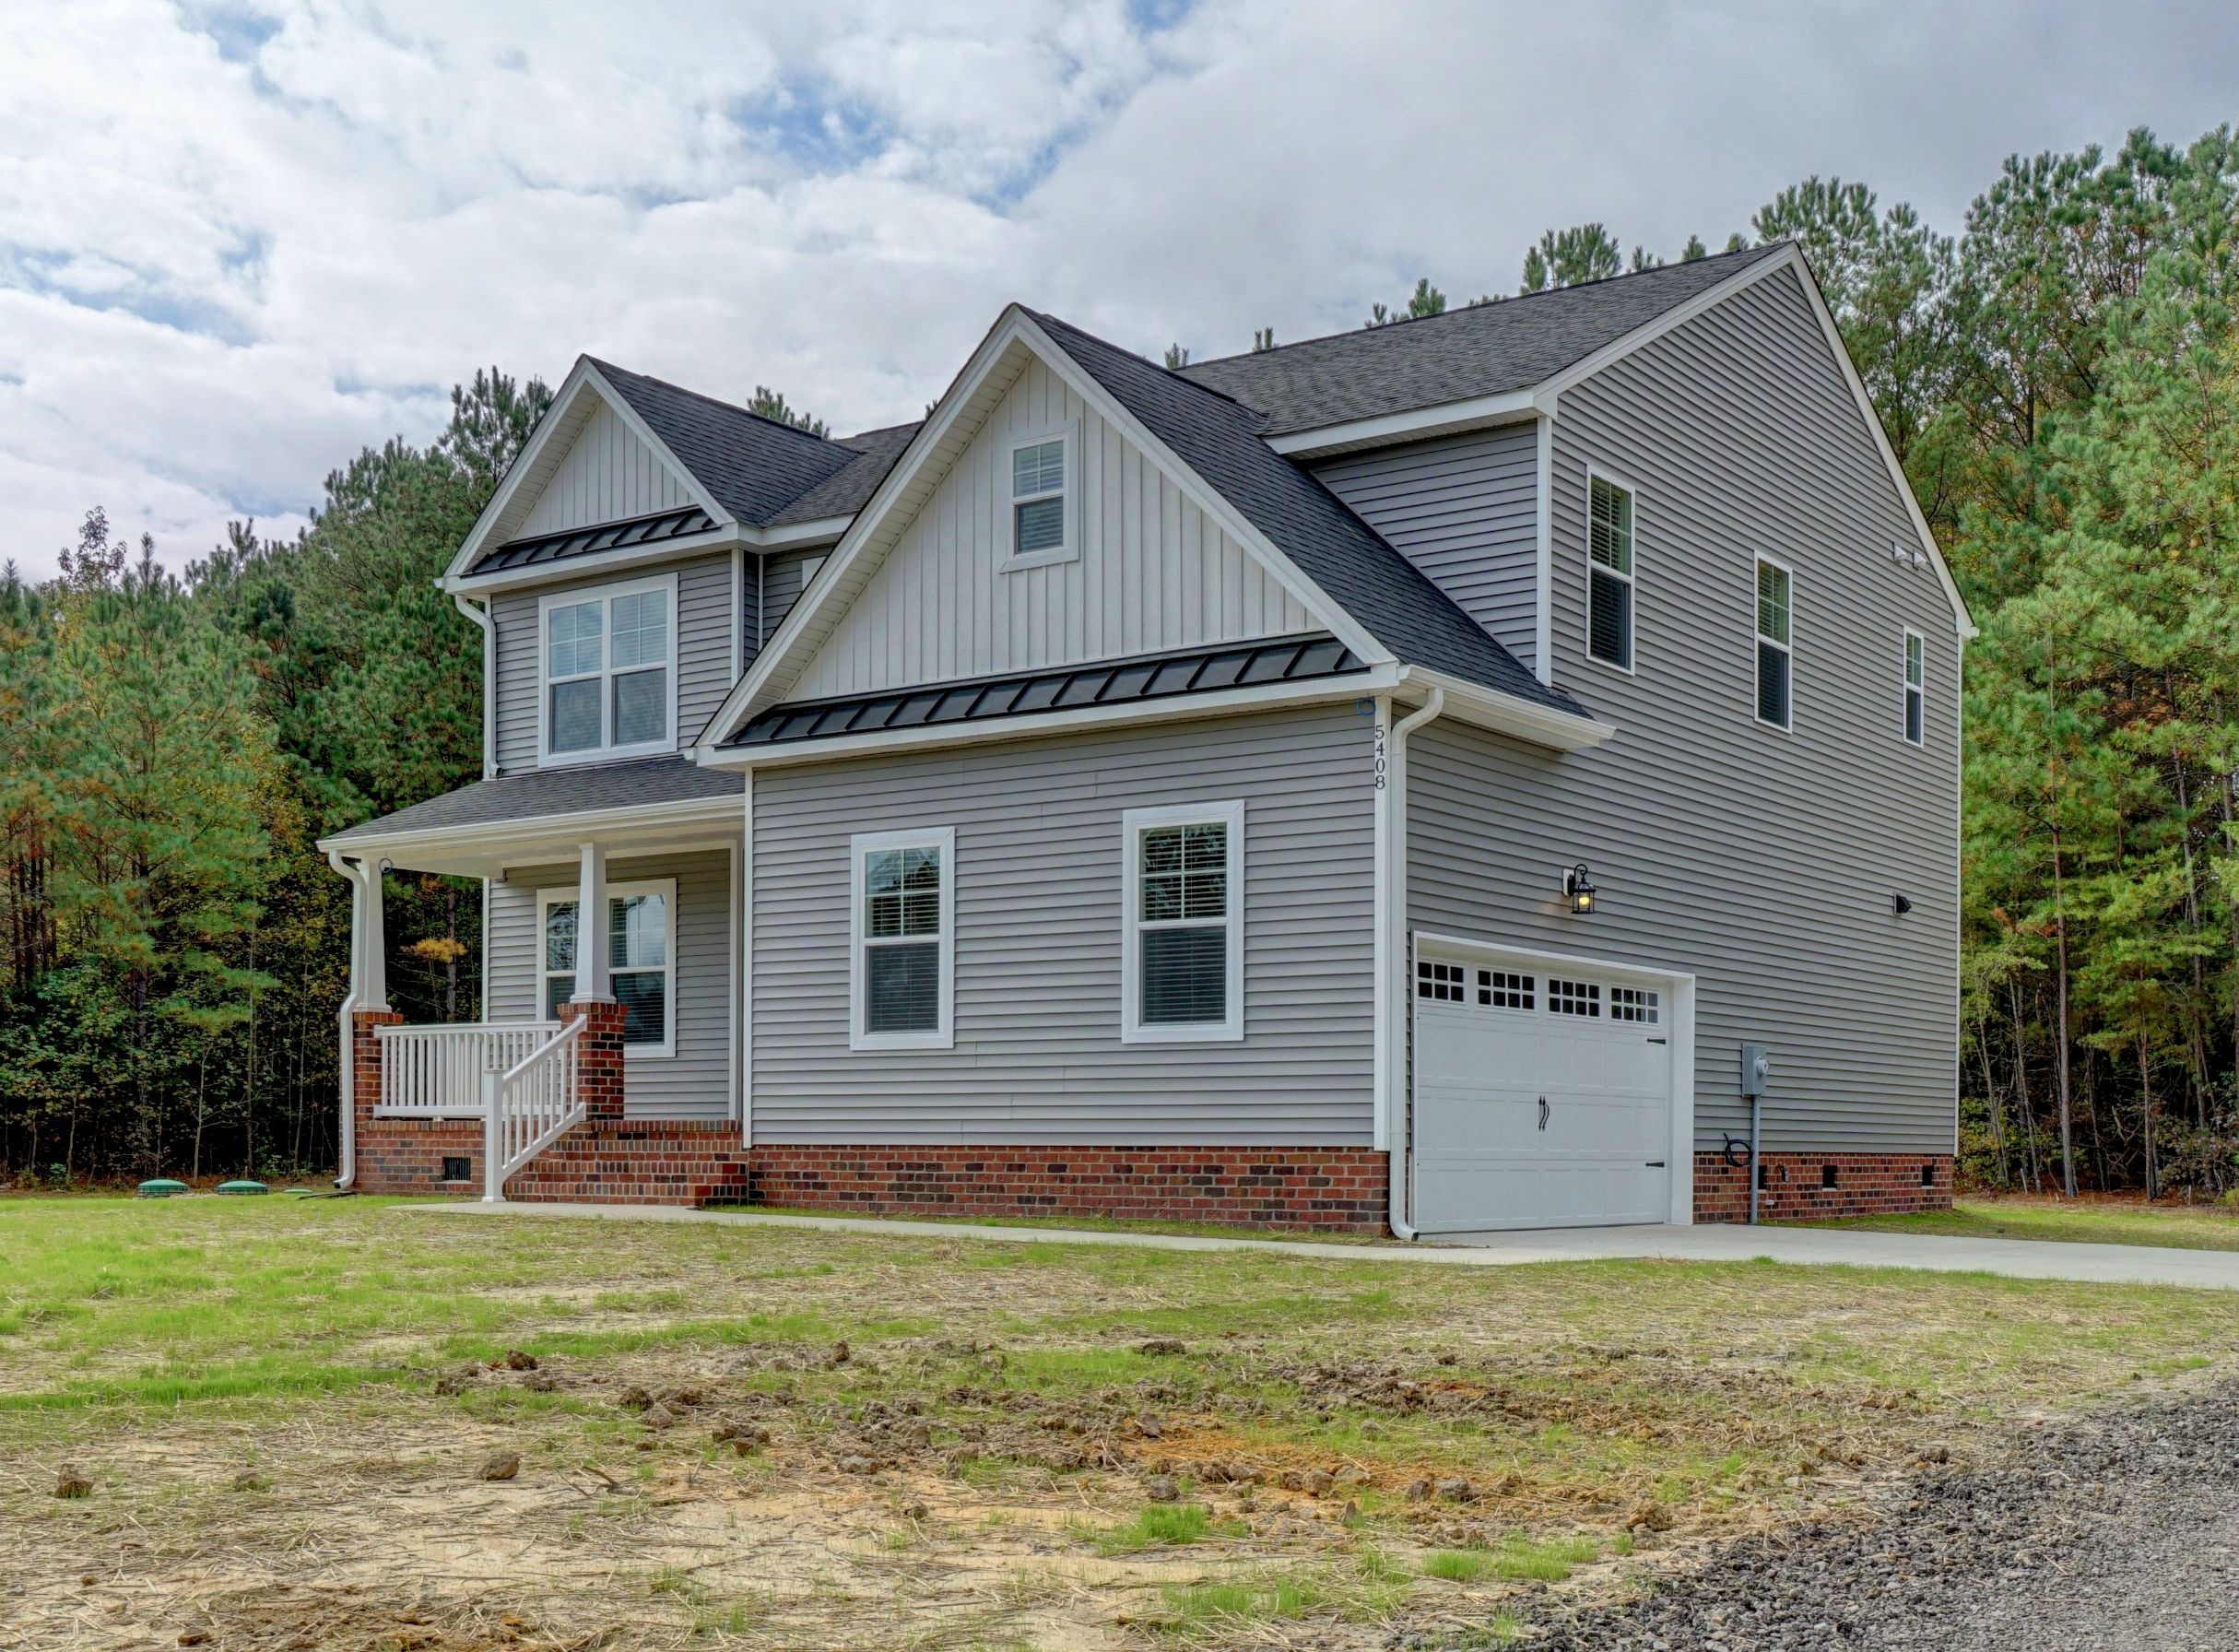 Home Builder in Smithfield VA. The Augusta Exterior Front Grey with Porch and Garage